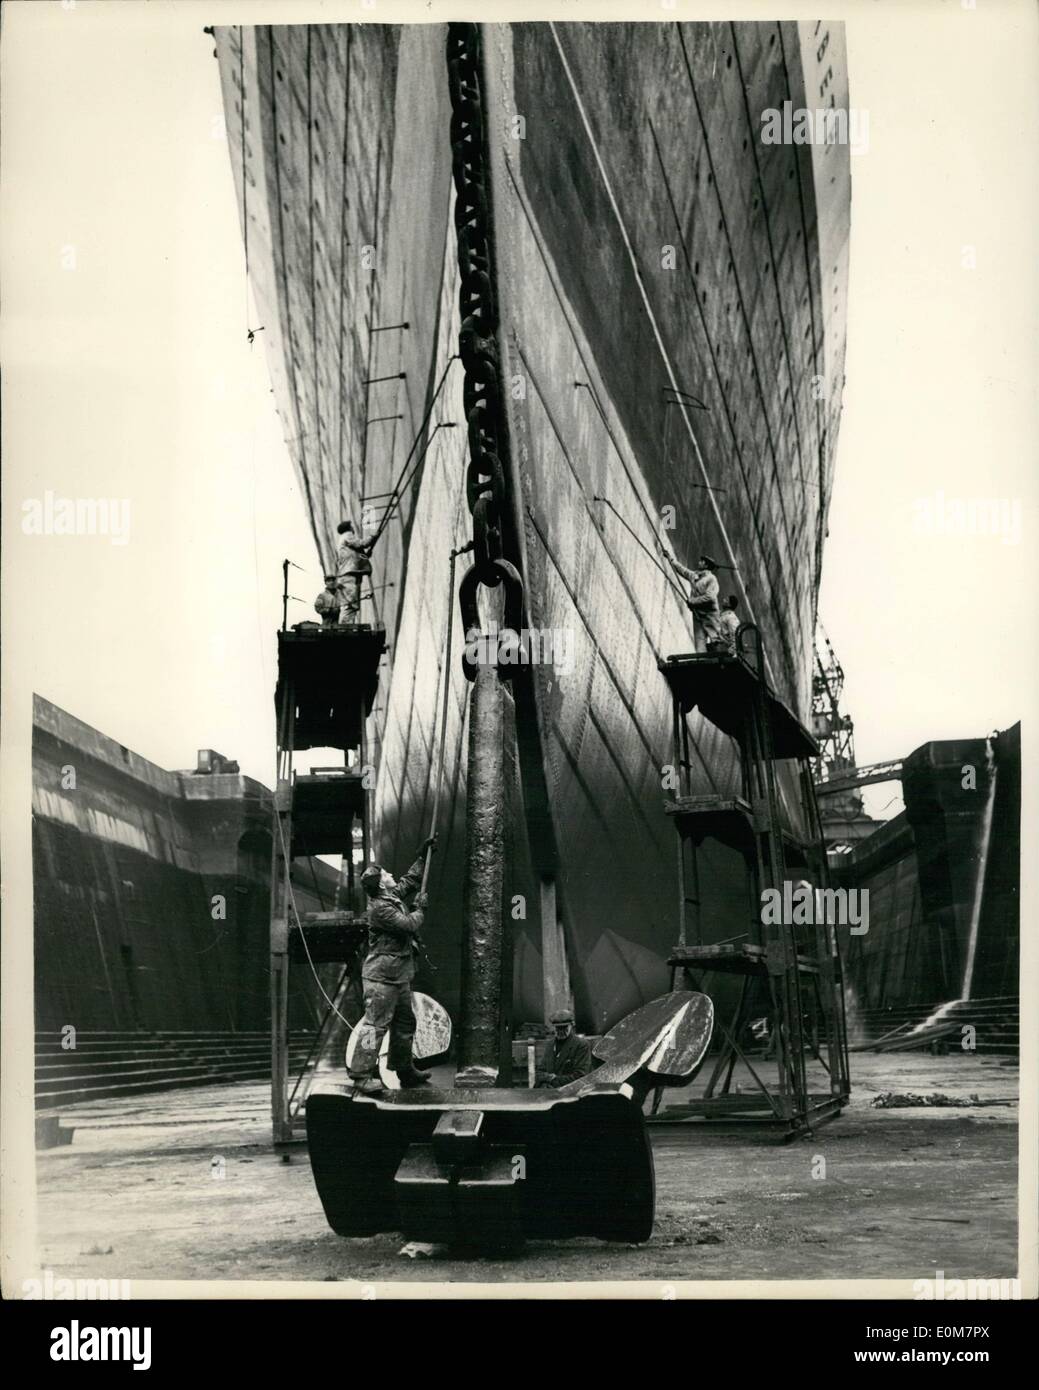 Jan. 01, 1954 - ''Queen Elizabeth'' in Dry Dock: The Liner Queen Elizabeth is now in King George V Dock at Southampton, where she is undergoing her annual overhaul. Photo shows the giant anchor is receiving attention, as the sides of the liner are painted at King George V Dock at Southampton. Stock Photo